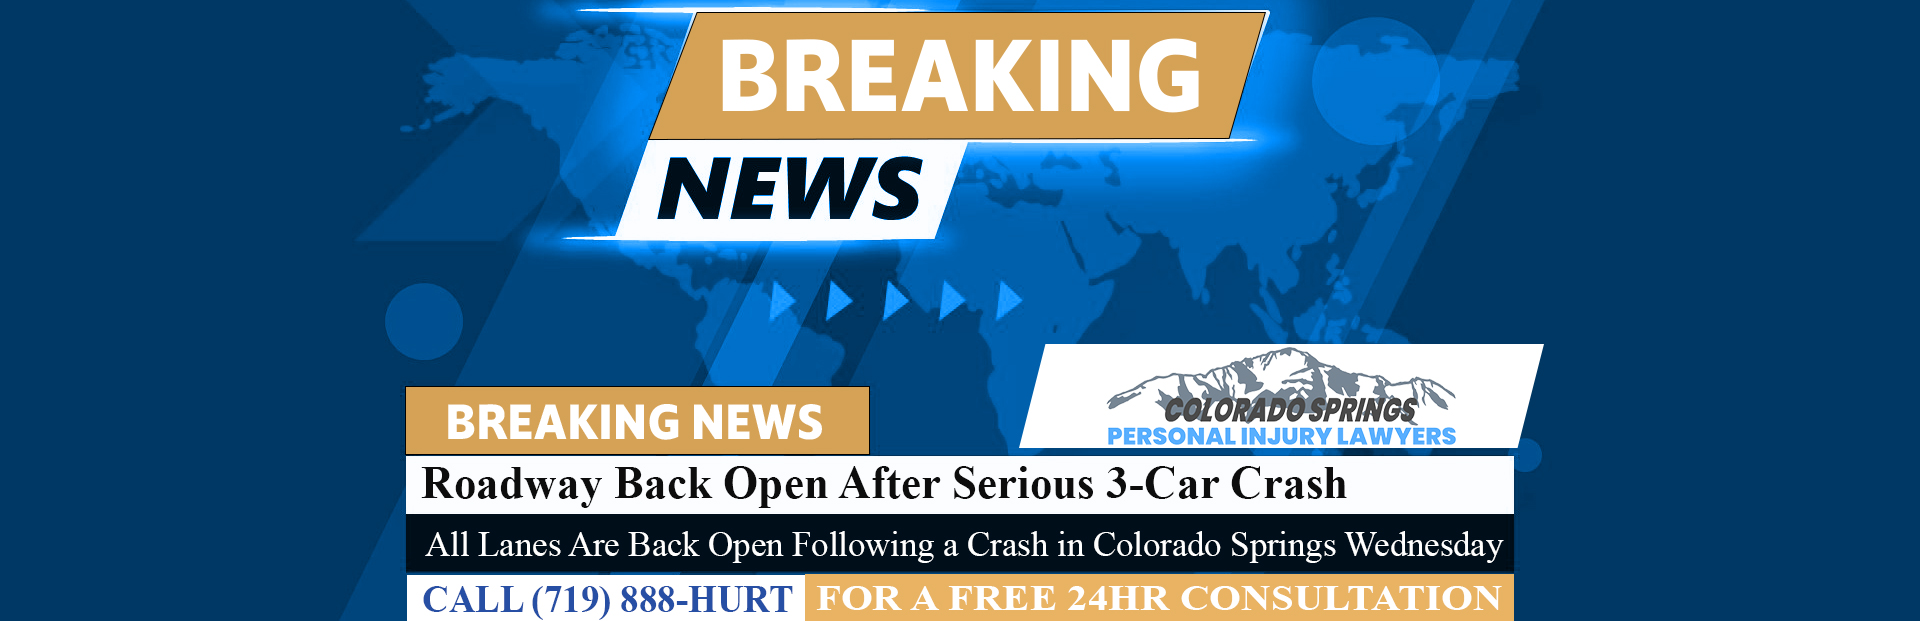 [03-28-24] Roadway Back Open After ‘Serious’ 3-Car Crash Closes East Colorado Springs Intersection